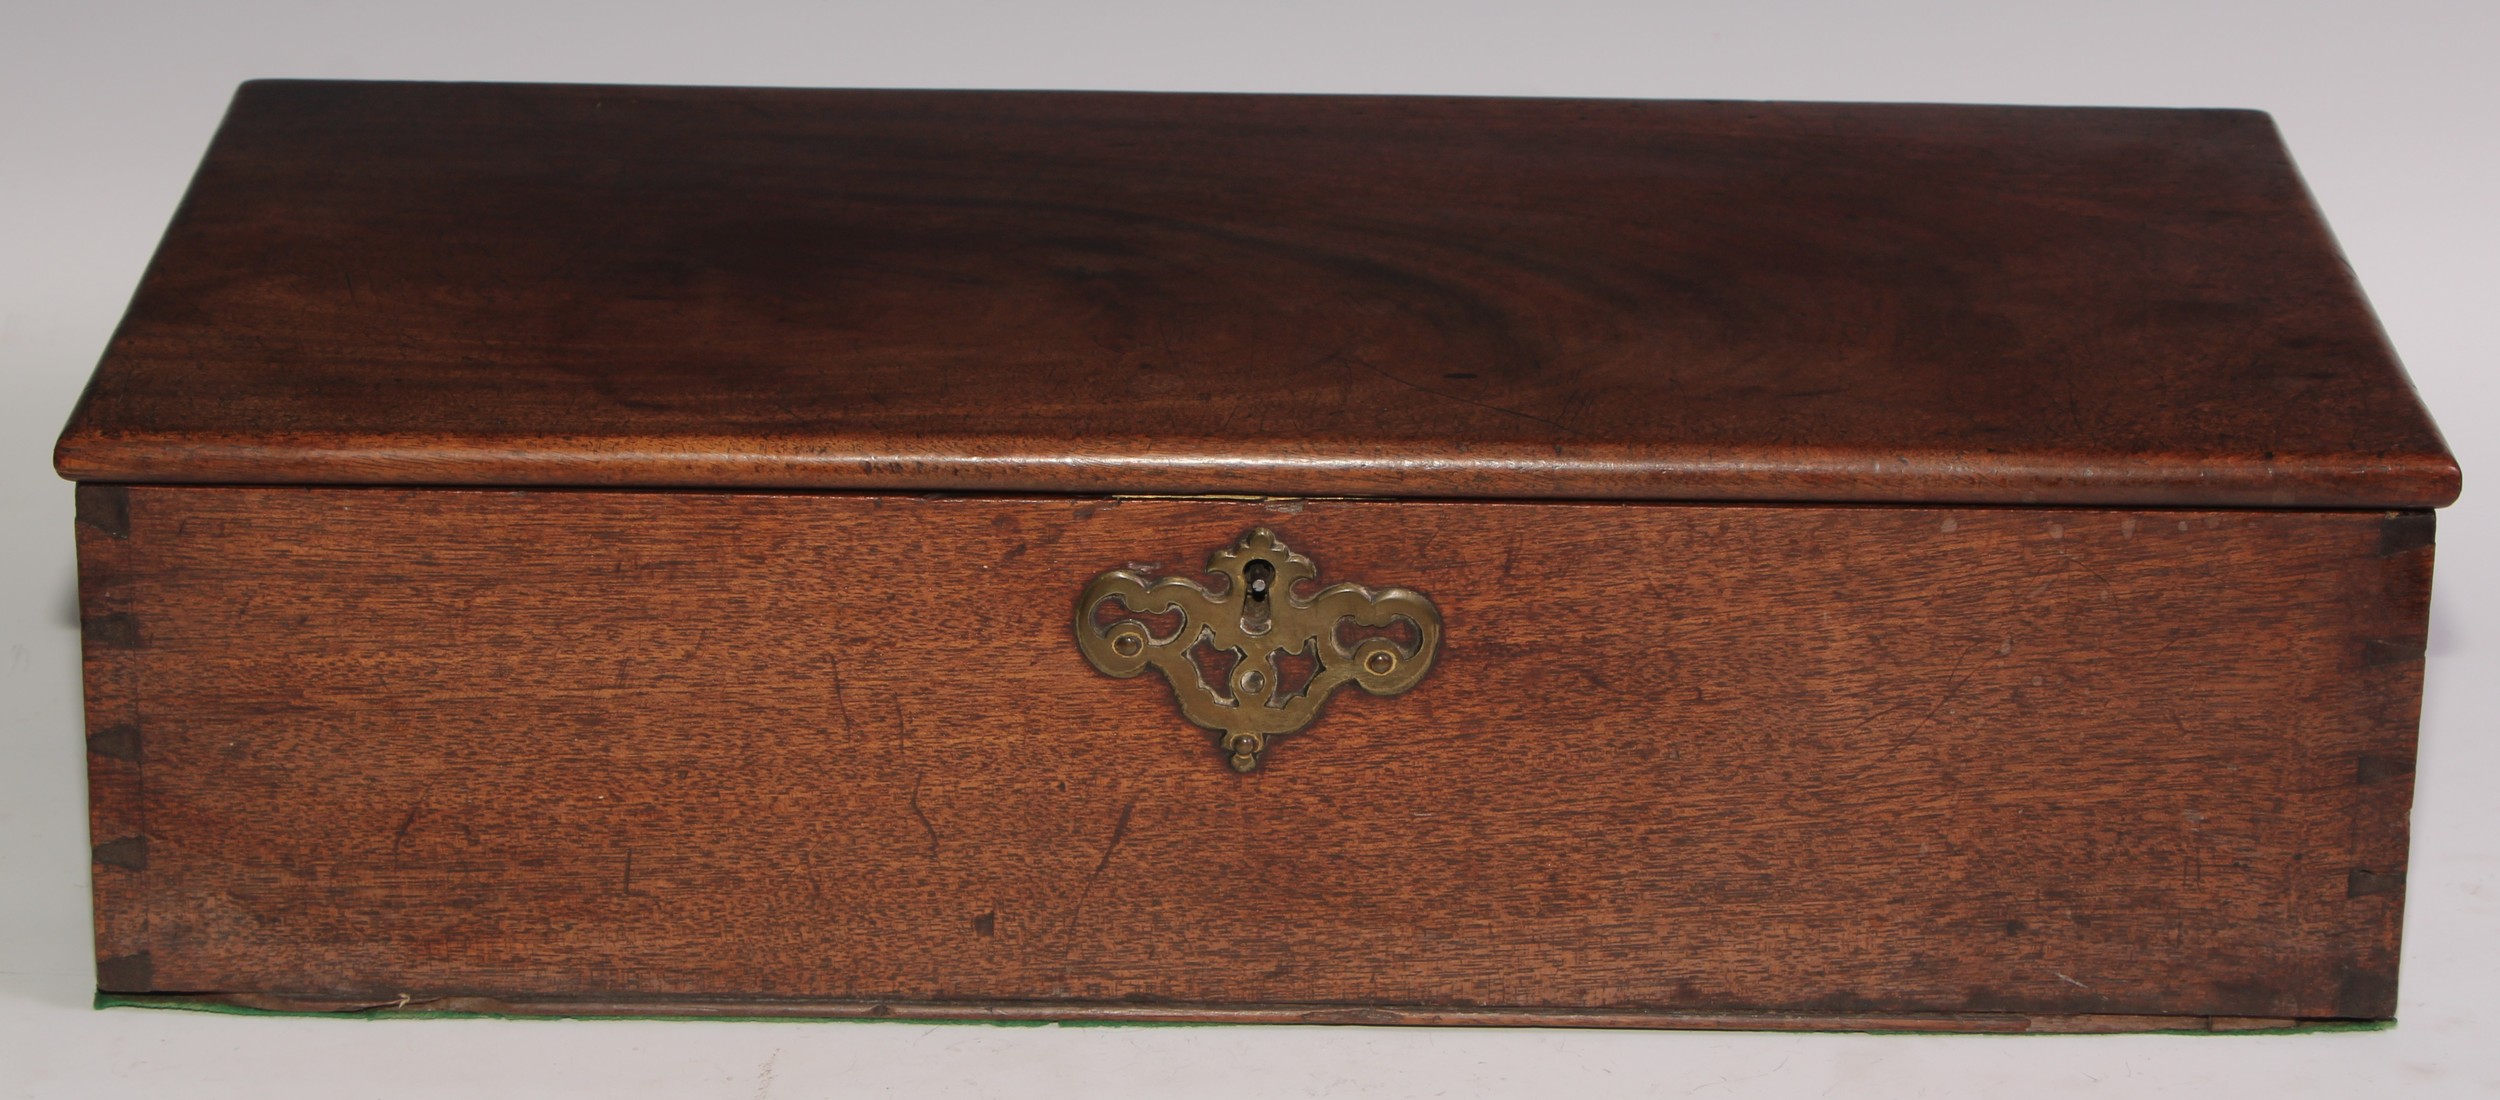 A George III mahogany rectangular document box, hinged cover, brass swan neck carrying handles and